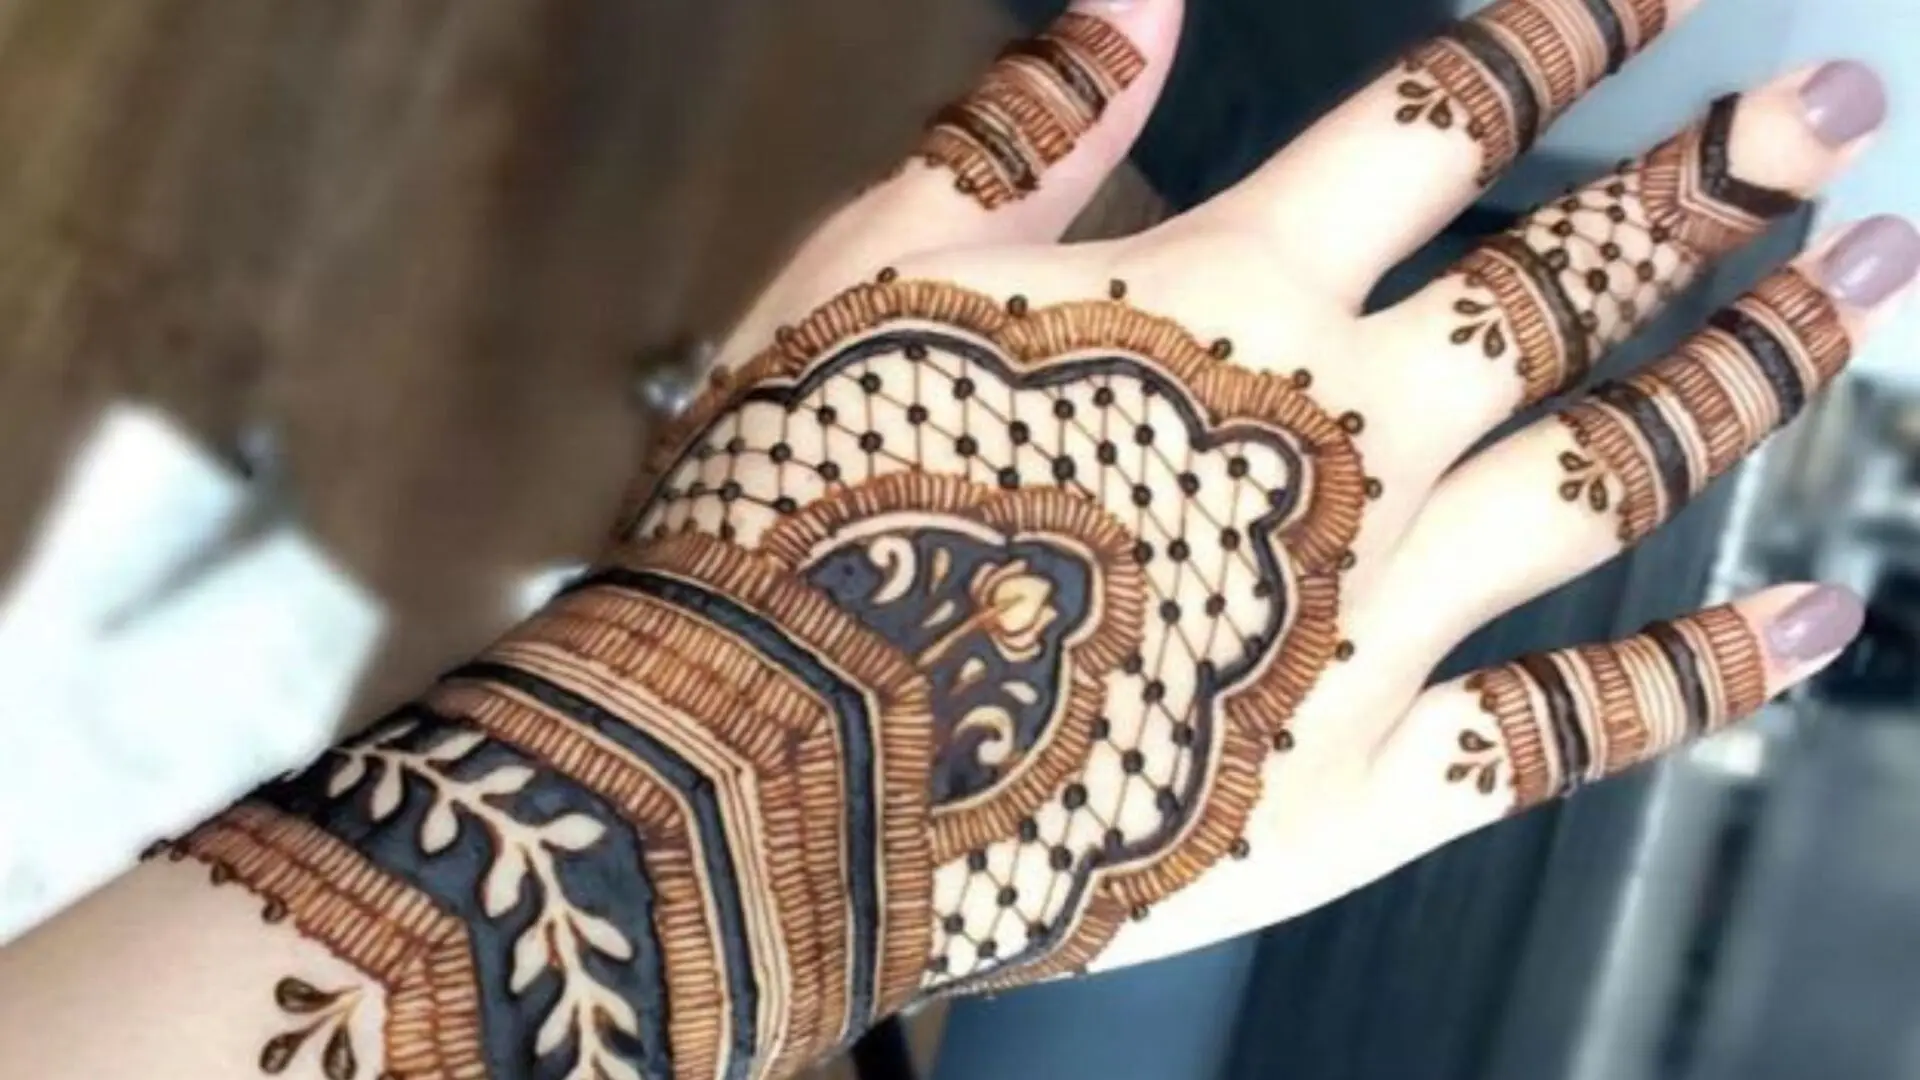 Beautiful Round Henna Designs For Hands - Ethnic Fashion Inspirations!